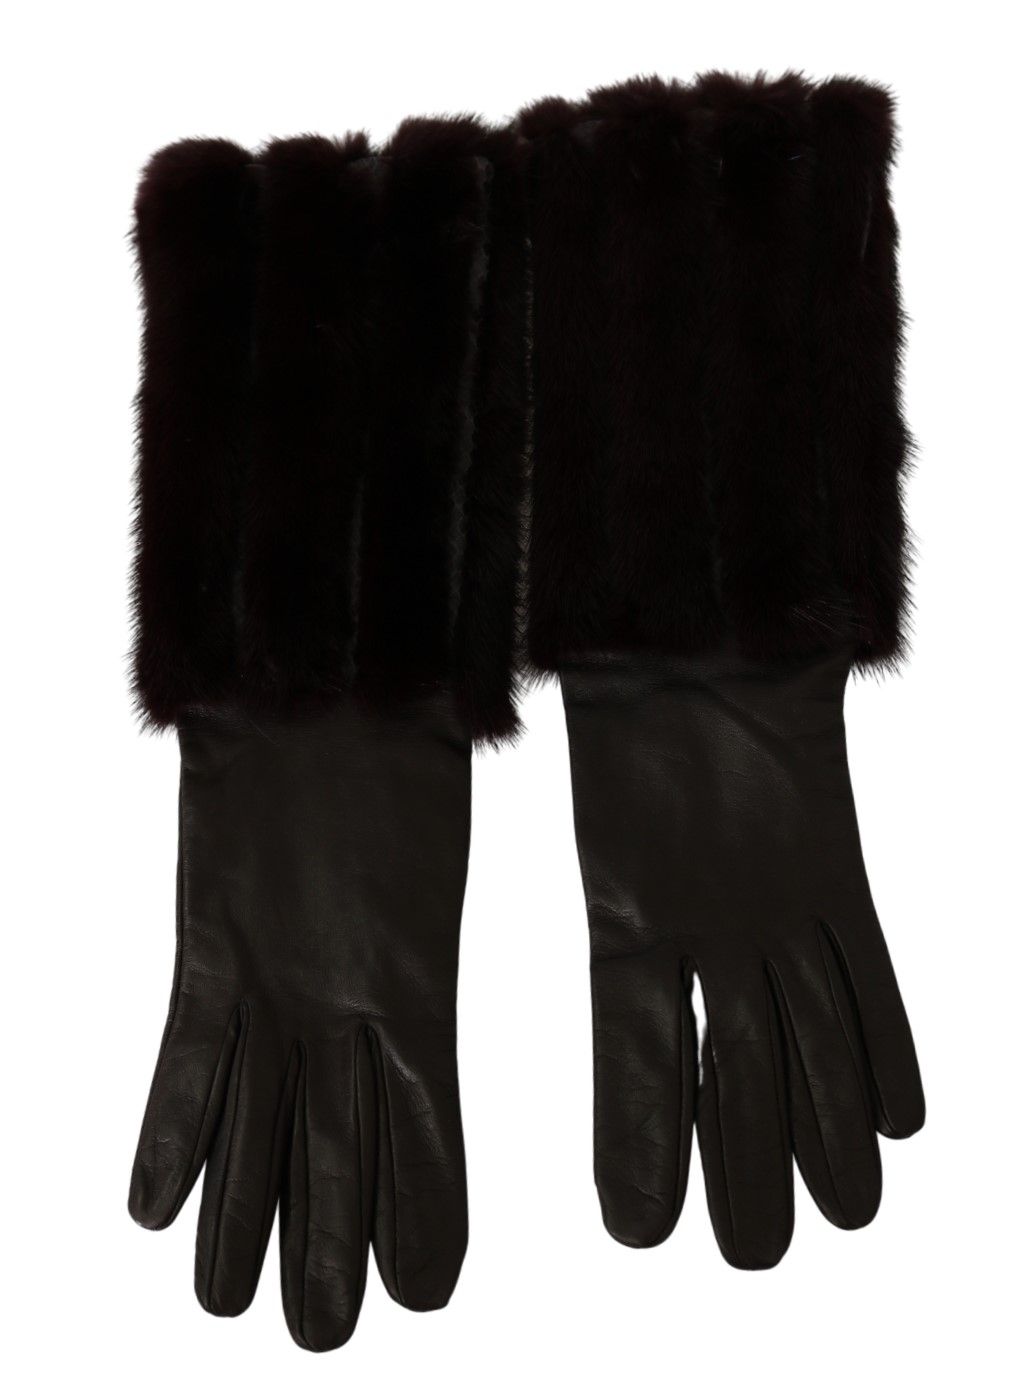 Brown Mid Arm Length Leather Fur Gloves